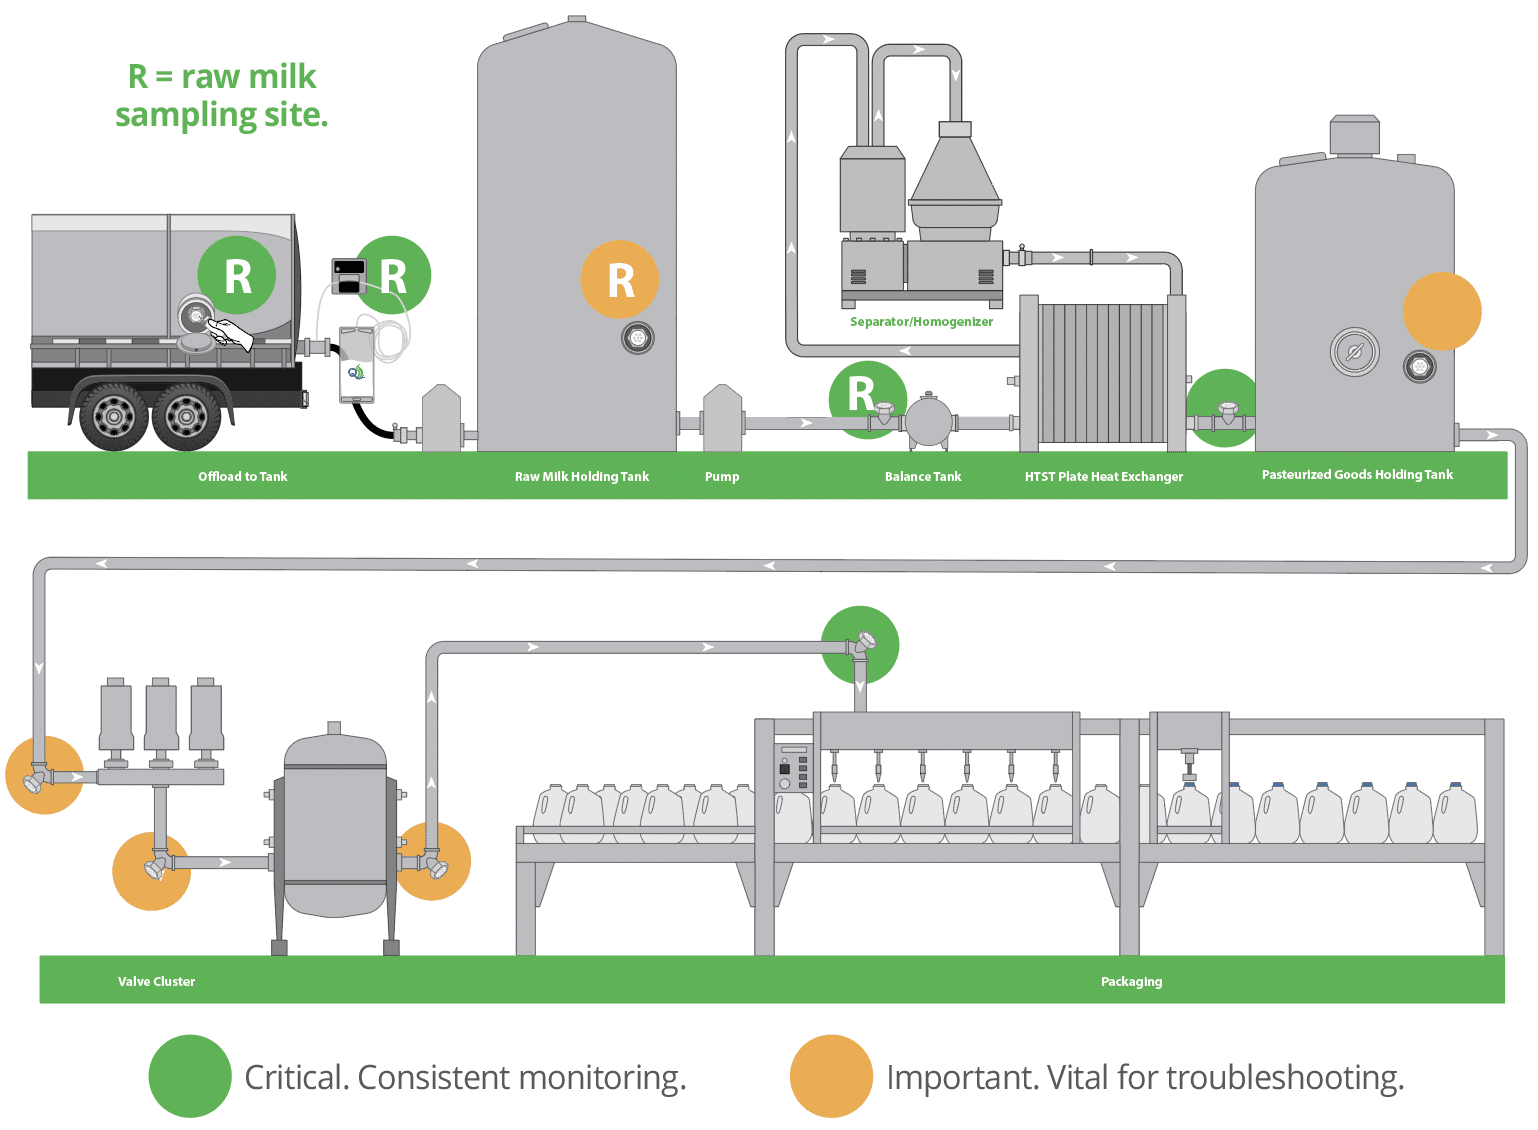 Aseptic and representative sampling for Dairy Plants